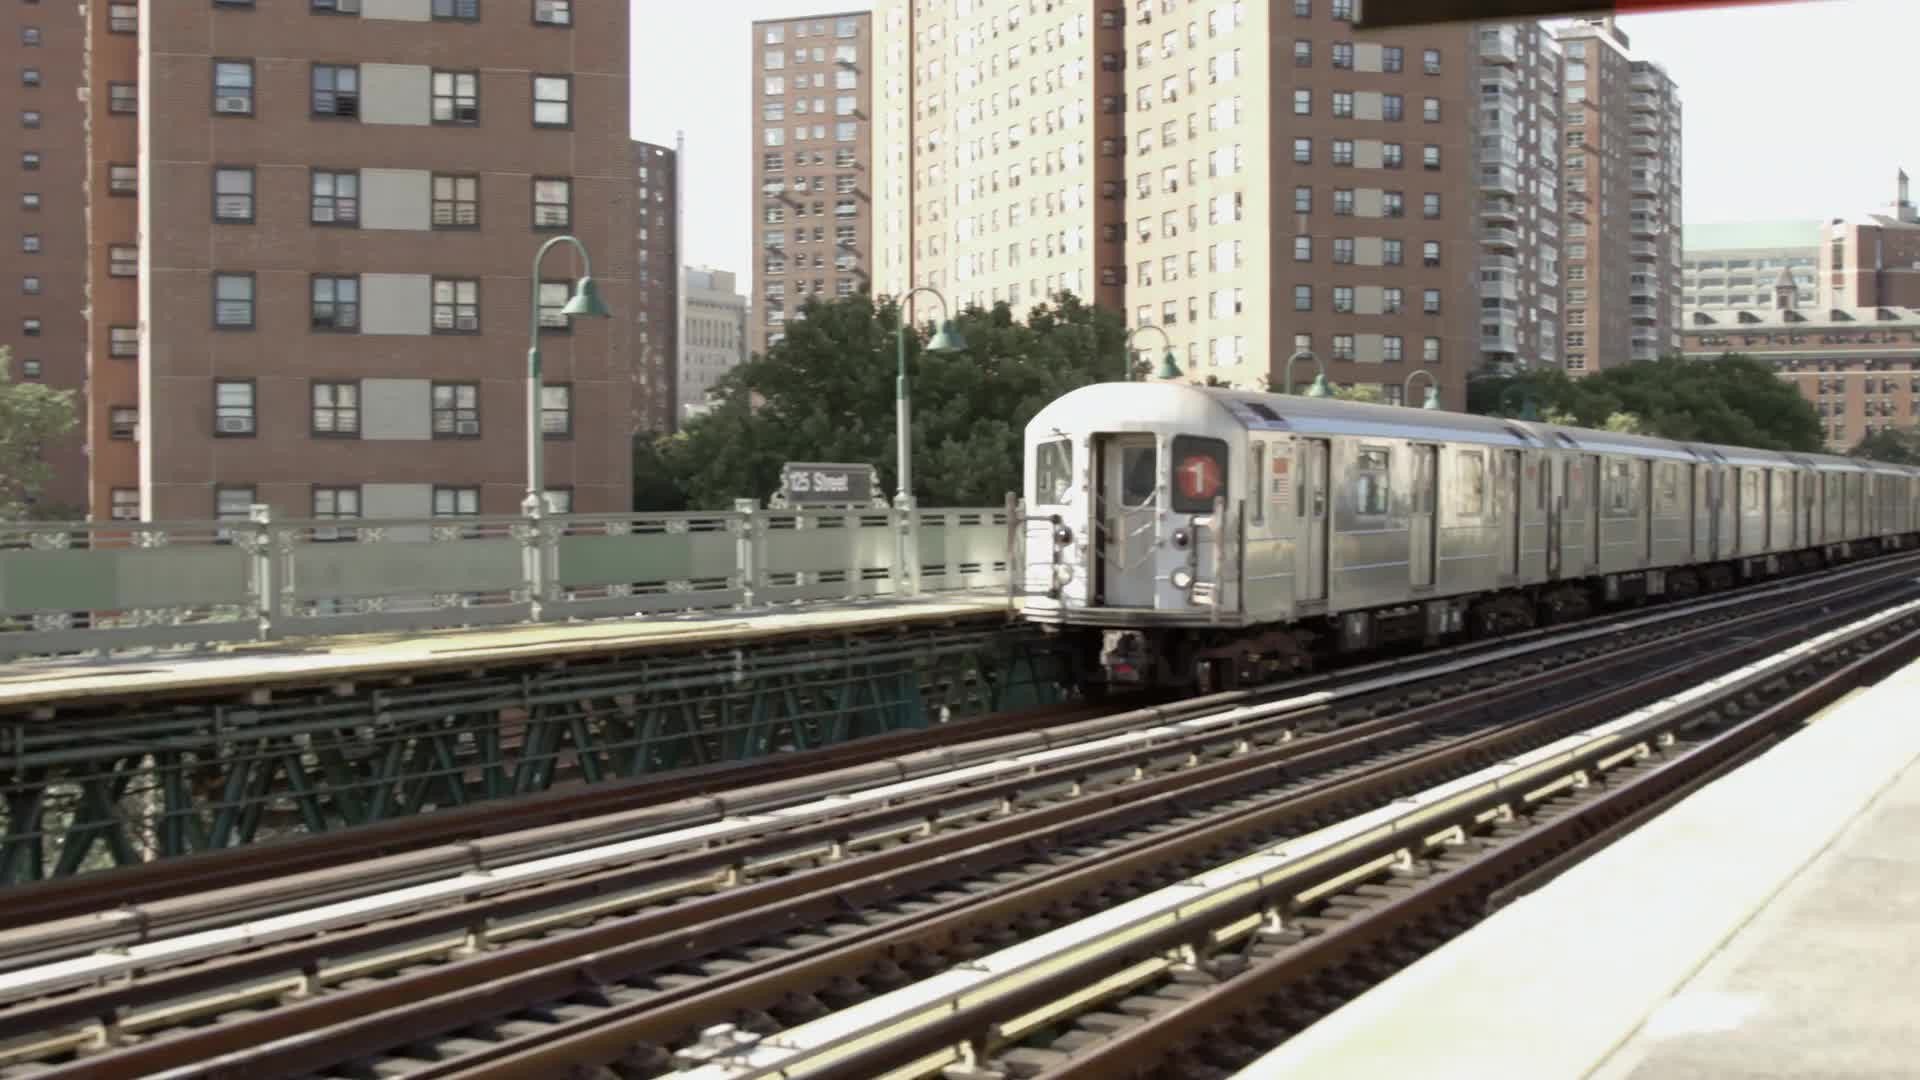 Copy of 1 Train entering elevated 125th street station in Harlem NYC